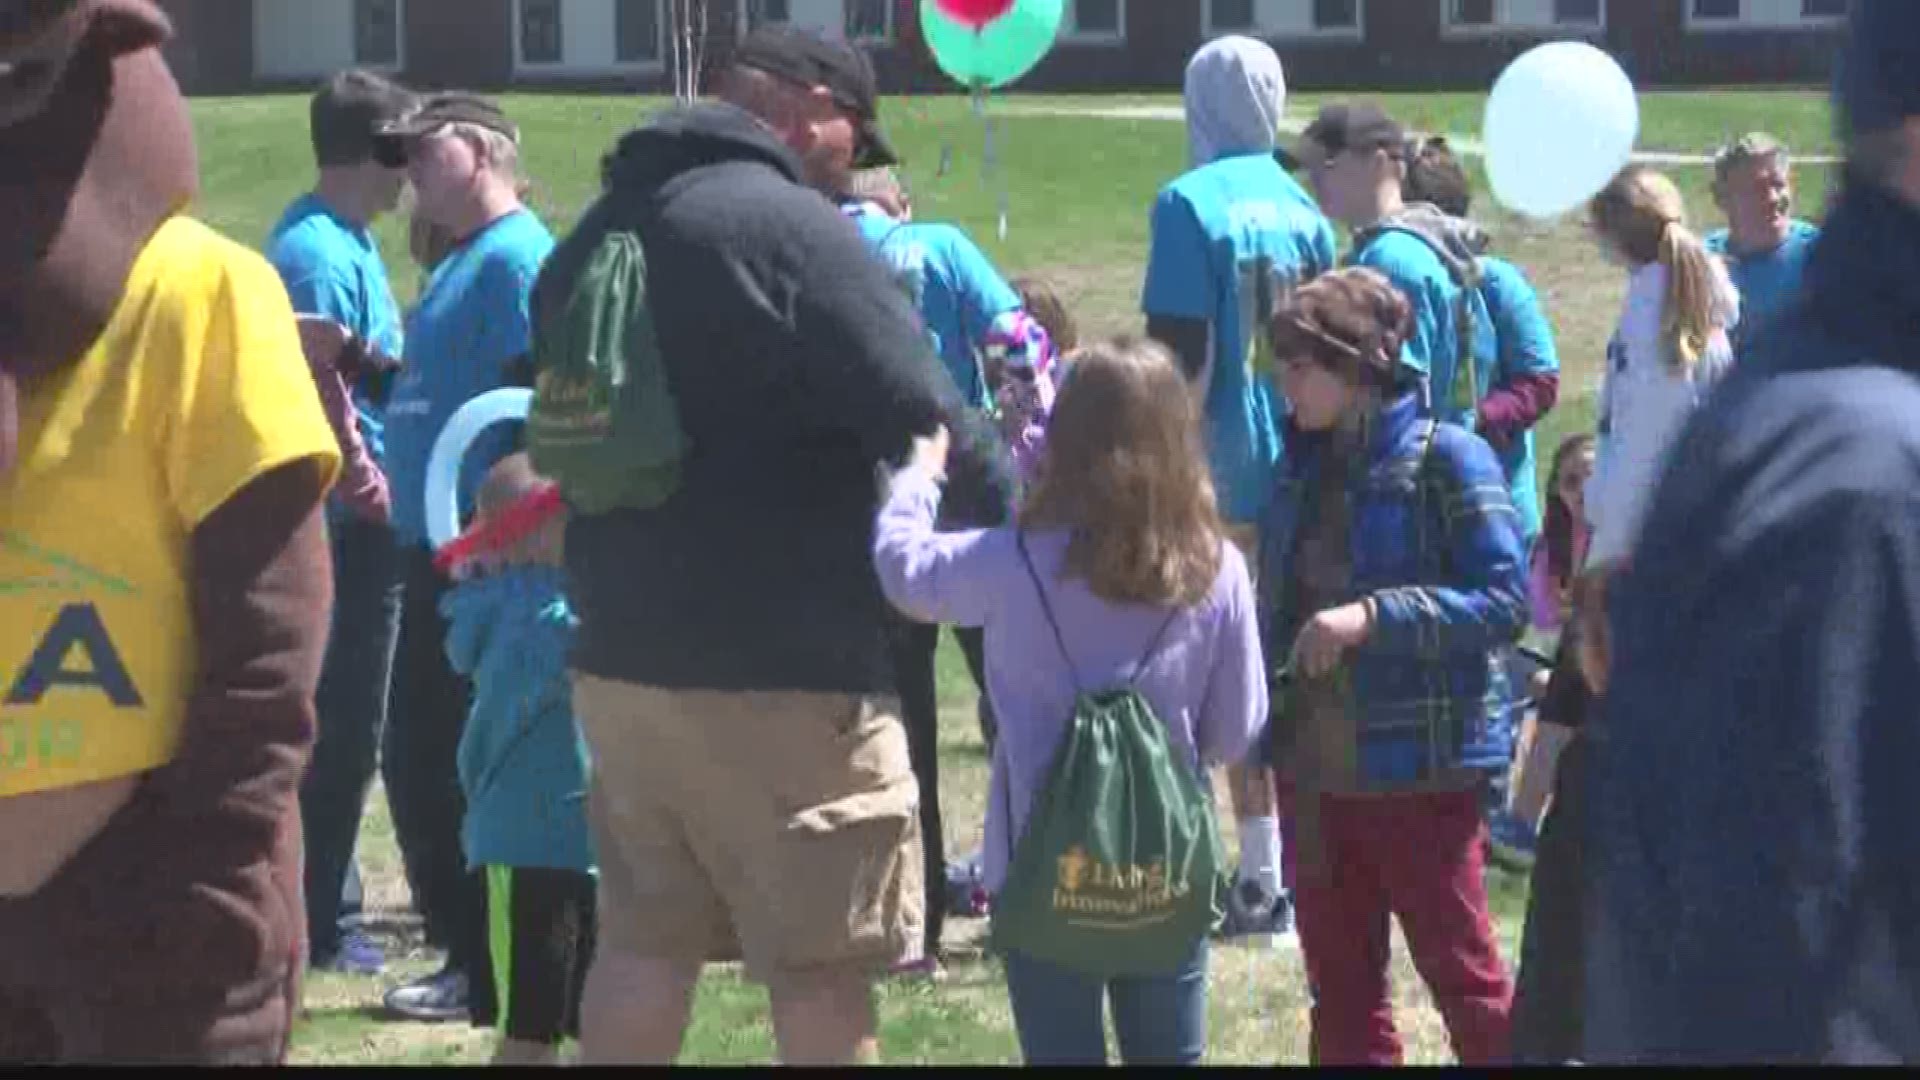 Annual walk for autism brings 'different' families together.